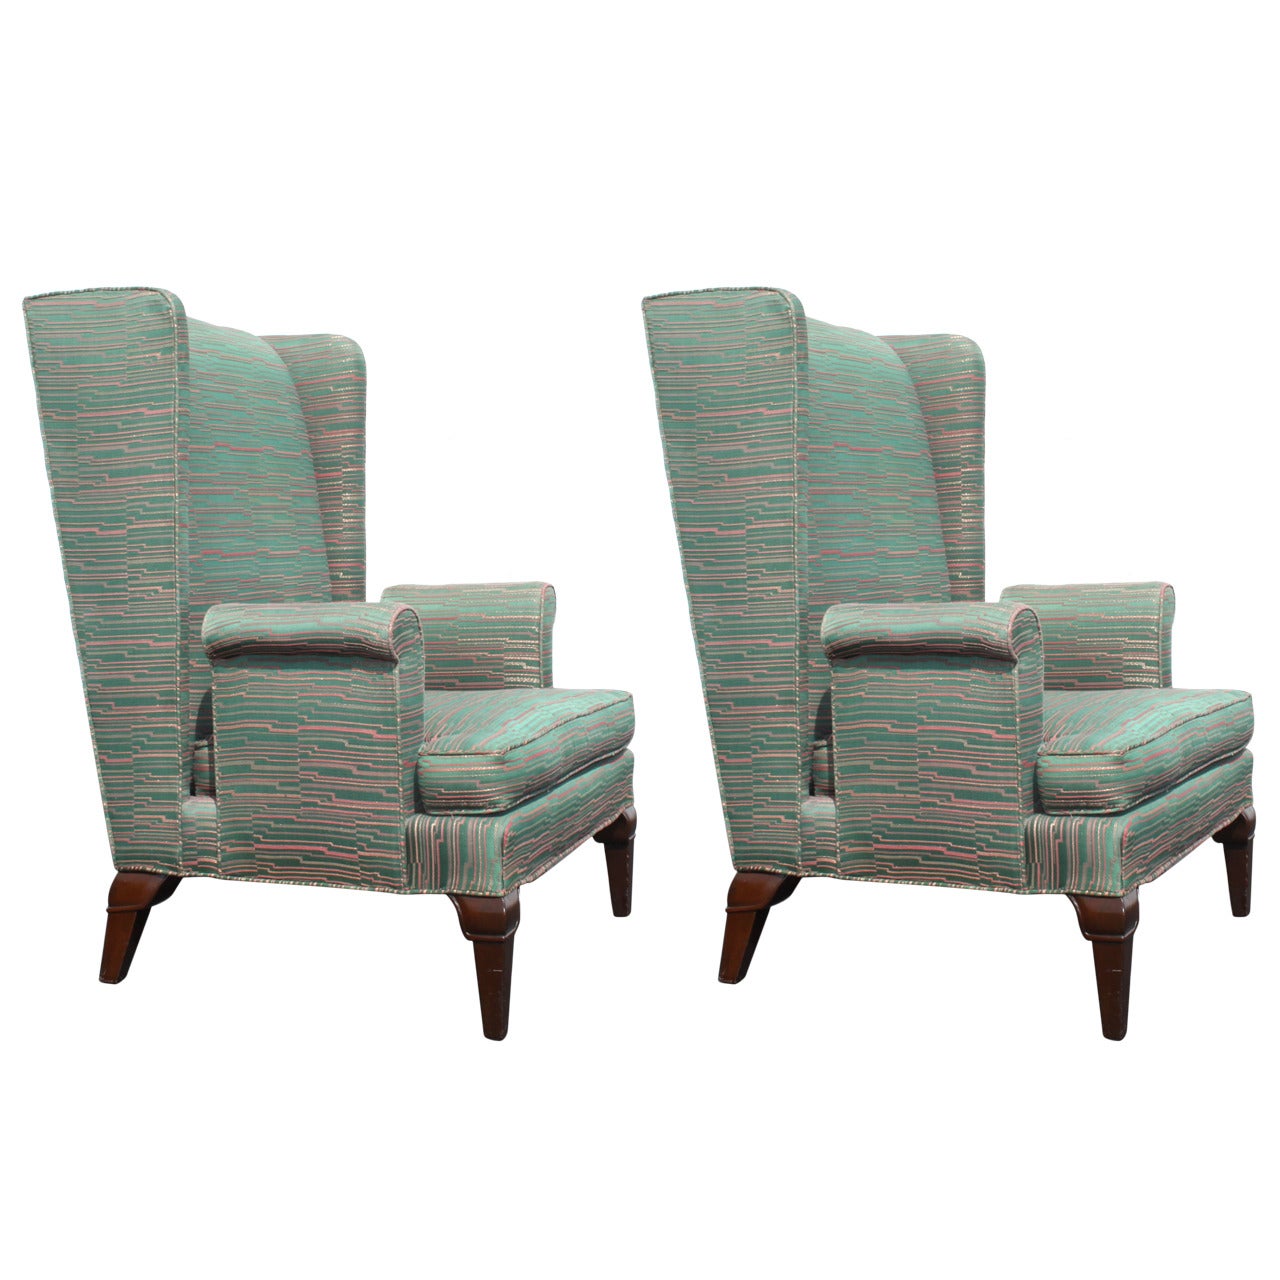 Pair of Tall Back Stylized Wingback Chairs Attributed to Grosfeld House